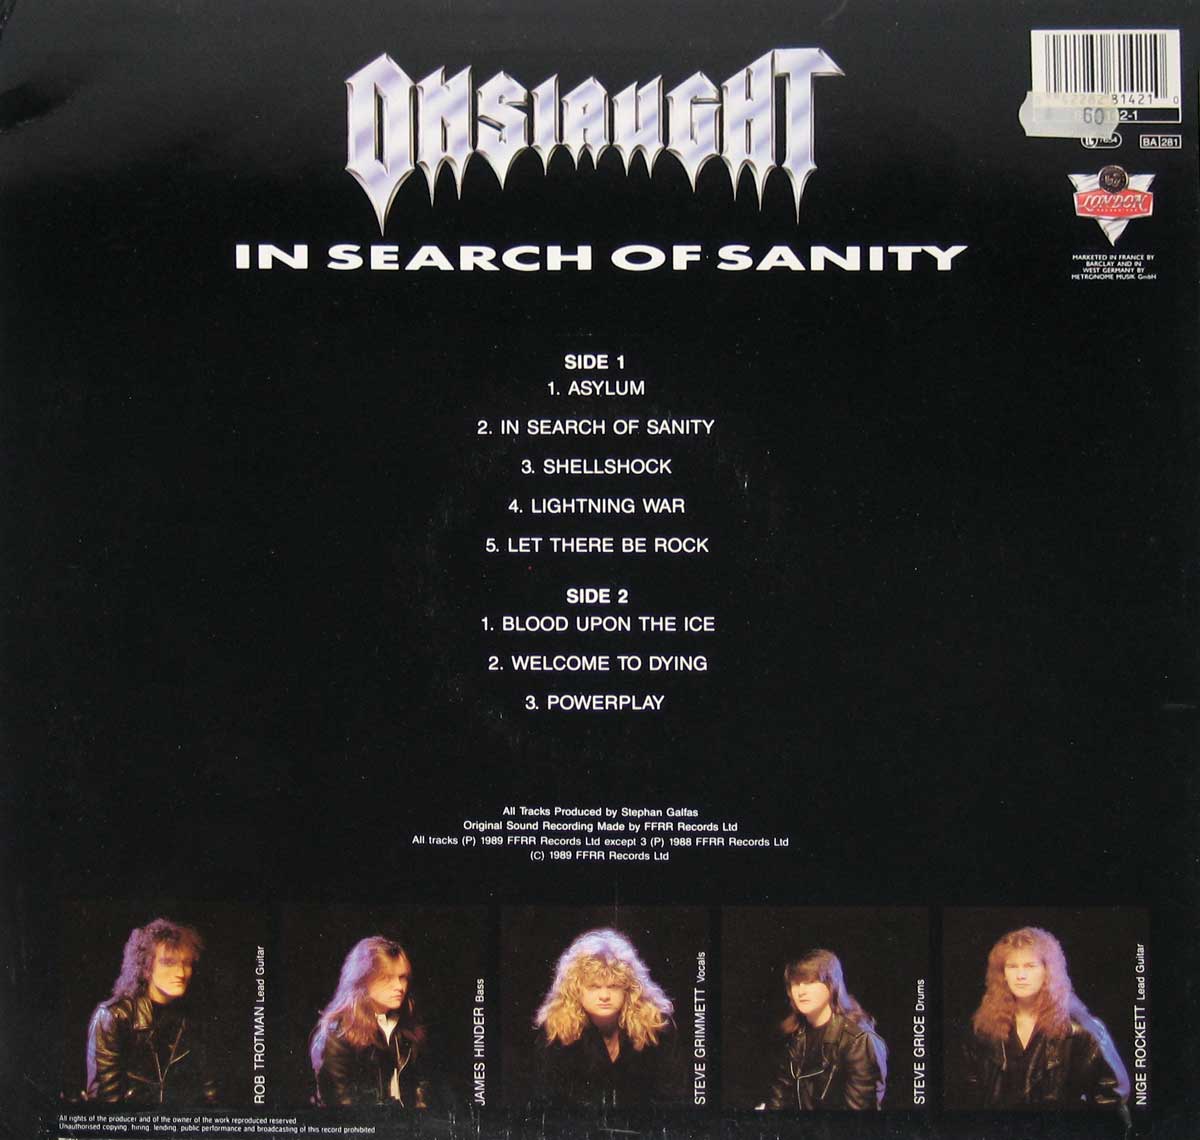 Photo's of the five ONSLAUGHT band-members on the album back cover of "In Search Of Sanity"  